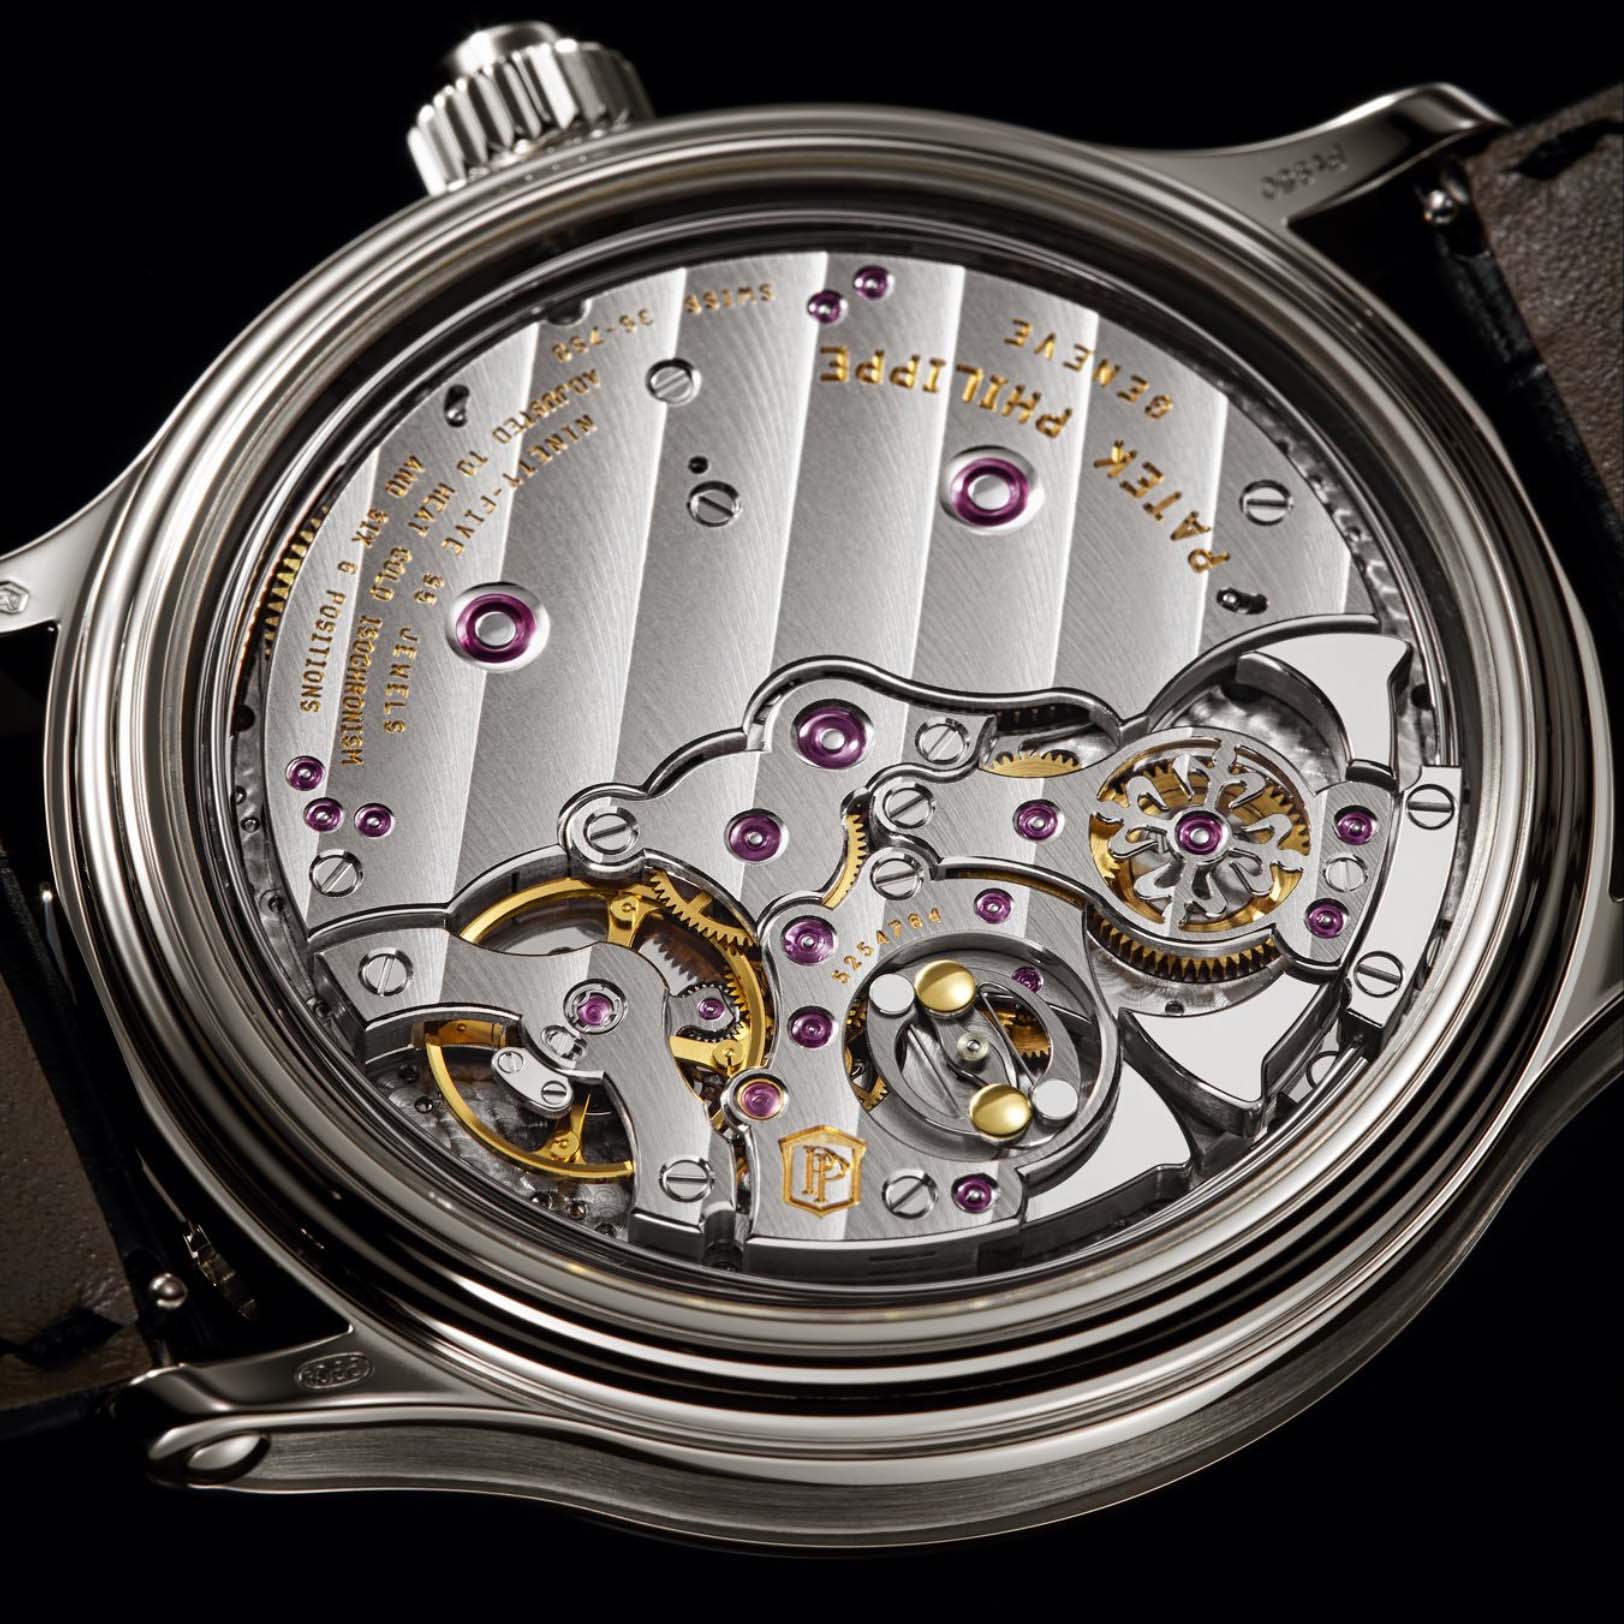 Grand Complications Grande Sonnerie Ref. 6301P gallery 9